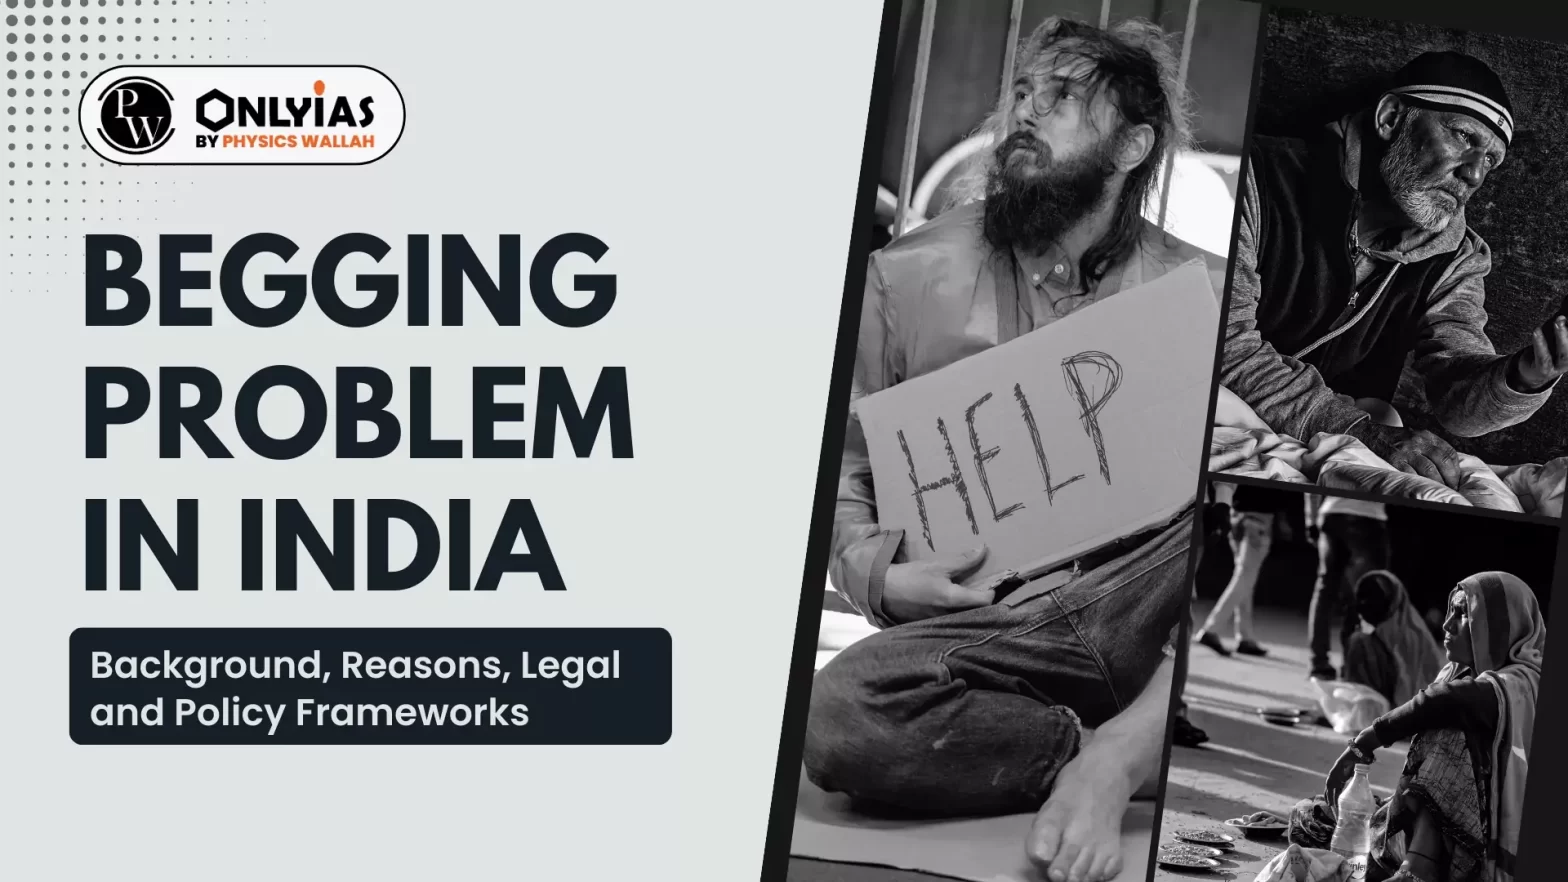 Begging Problem in India: Background, Reasons, Legal and Policy Frameworks